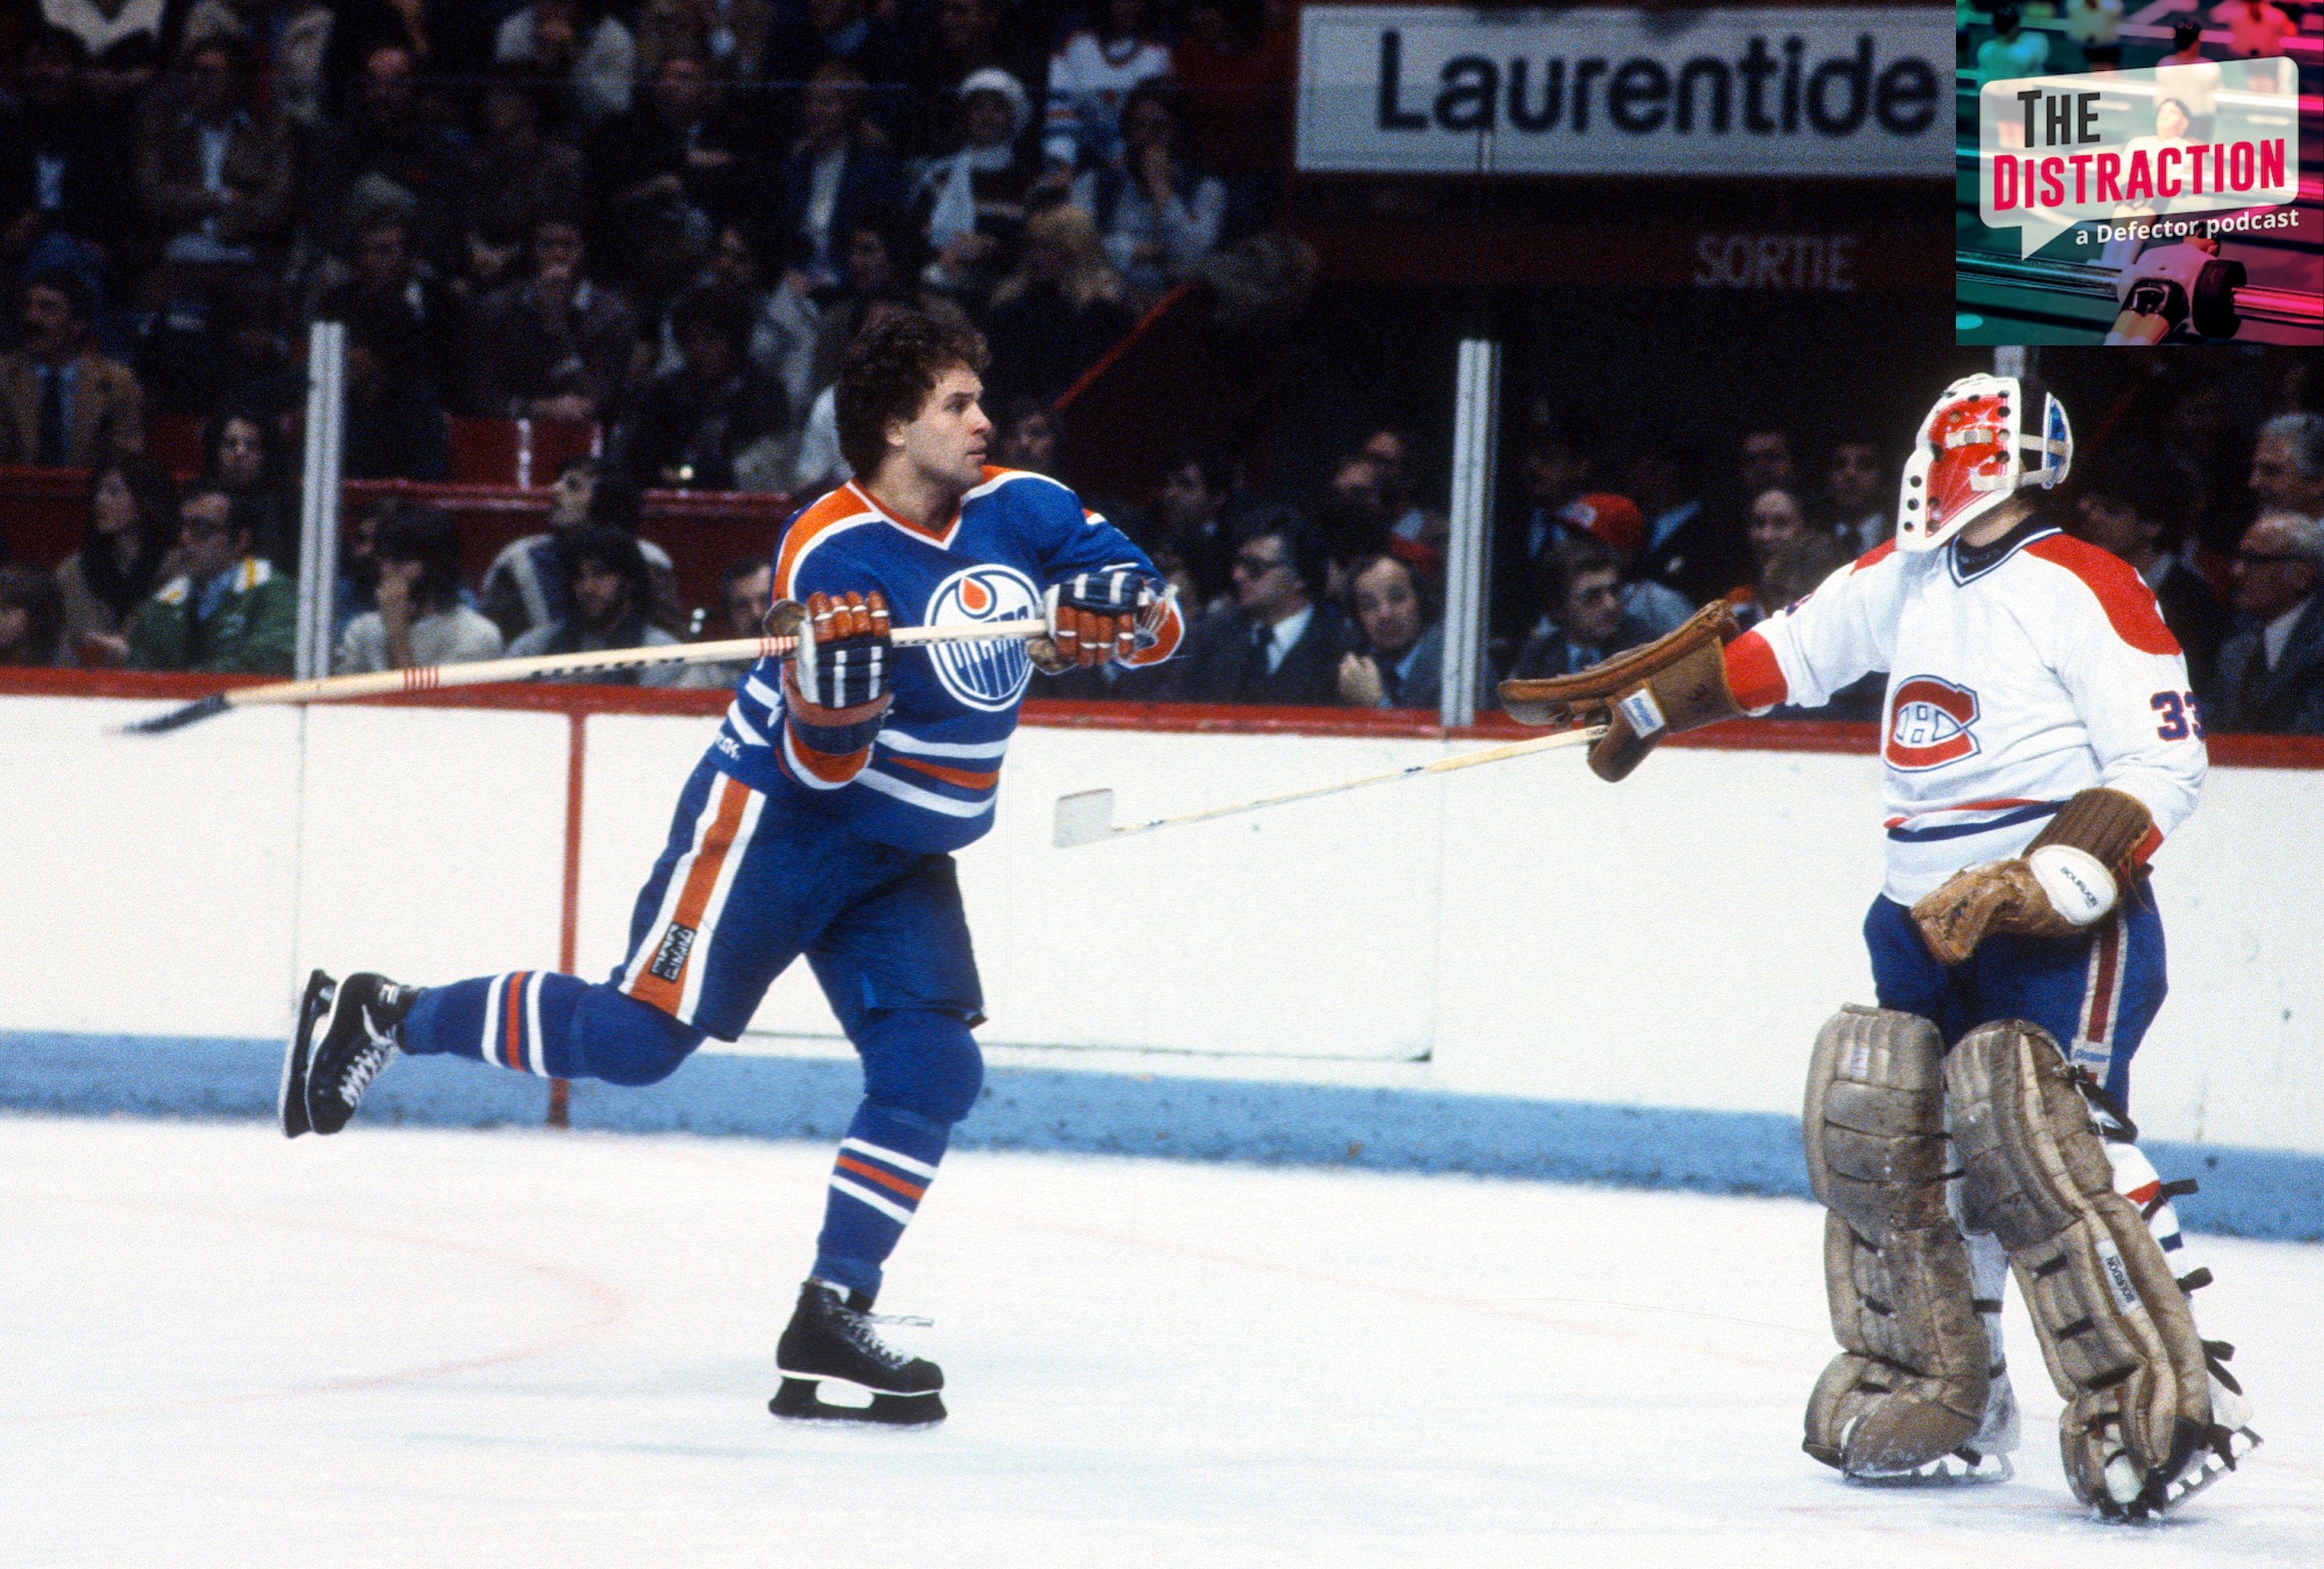 Dave Lumley of the Edmonton Oilers skates against the Montreal Canadiens during an NHL Hockey game circa 1981 at the Montreal Forum.